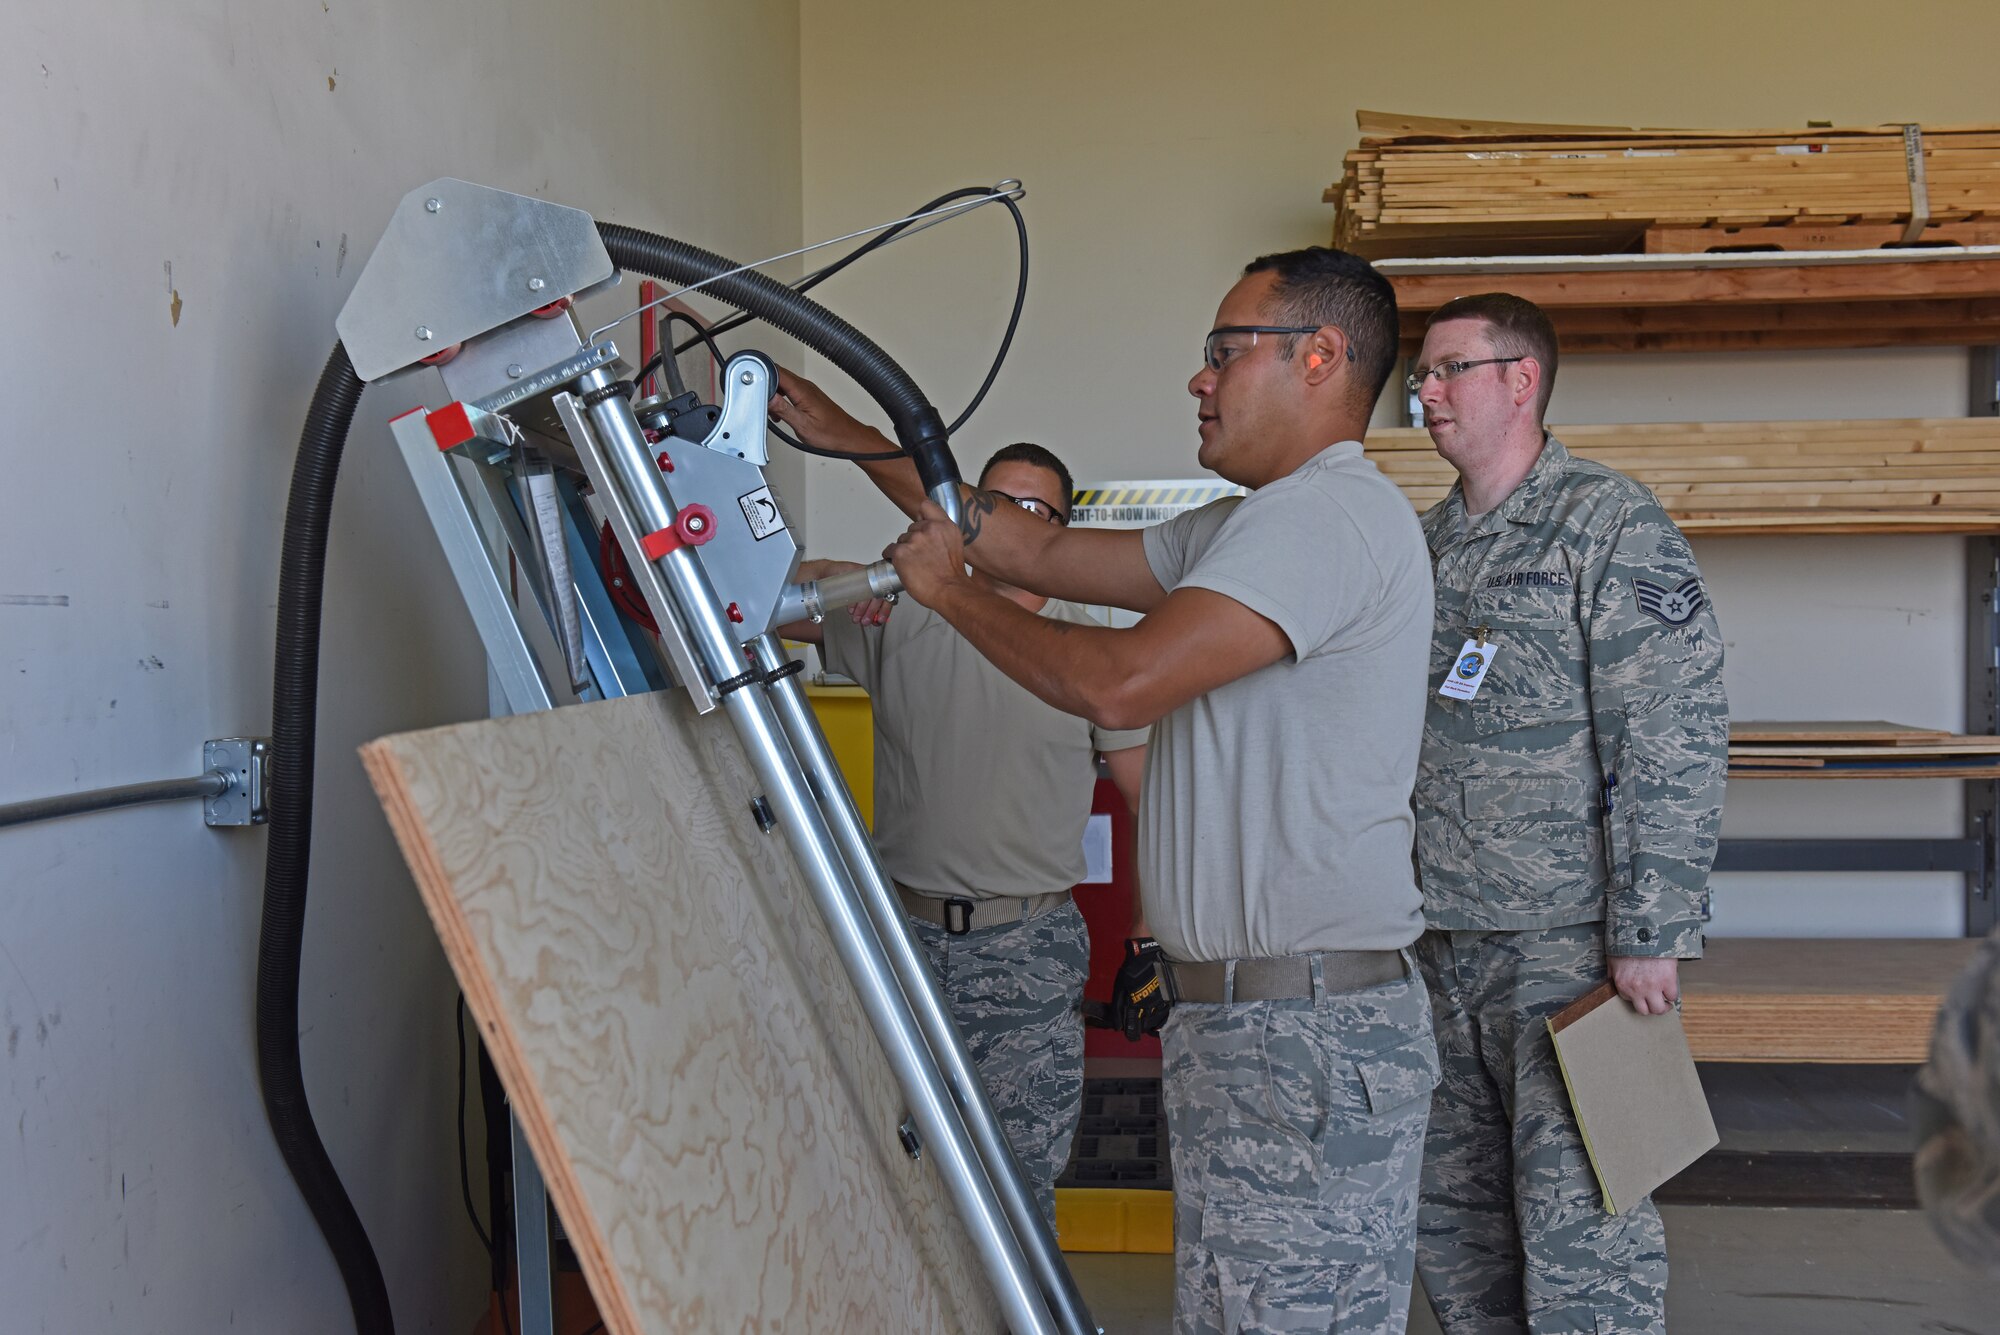 U.S. Air Force Tech. Sgt. Robert Isaac, 140th Logistics Readiness Squadron, Colorado Air National Guard, demonstrates proper use of a panel saw to an inspector during a Wing Wartime Readiness Inspection, Buckley Air Force Base, Colo., Oct. 17, 2015. The WWRI is part of the new Air Force Inspection System which focuses on evaluating mission readiness instead of inspection readiness, allowing commanders to concentrate on strengthening the force by improving mission effectiveness every day. (U.S. Air National Guard photo by Senior Airman Michelle Y. Alvarez-Rea)